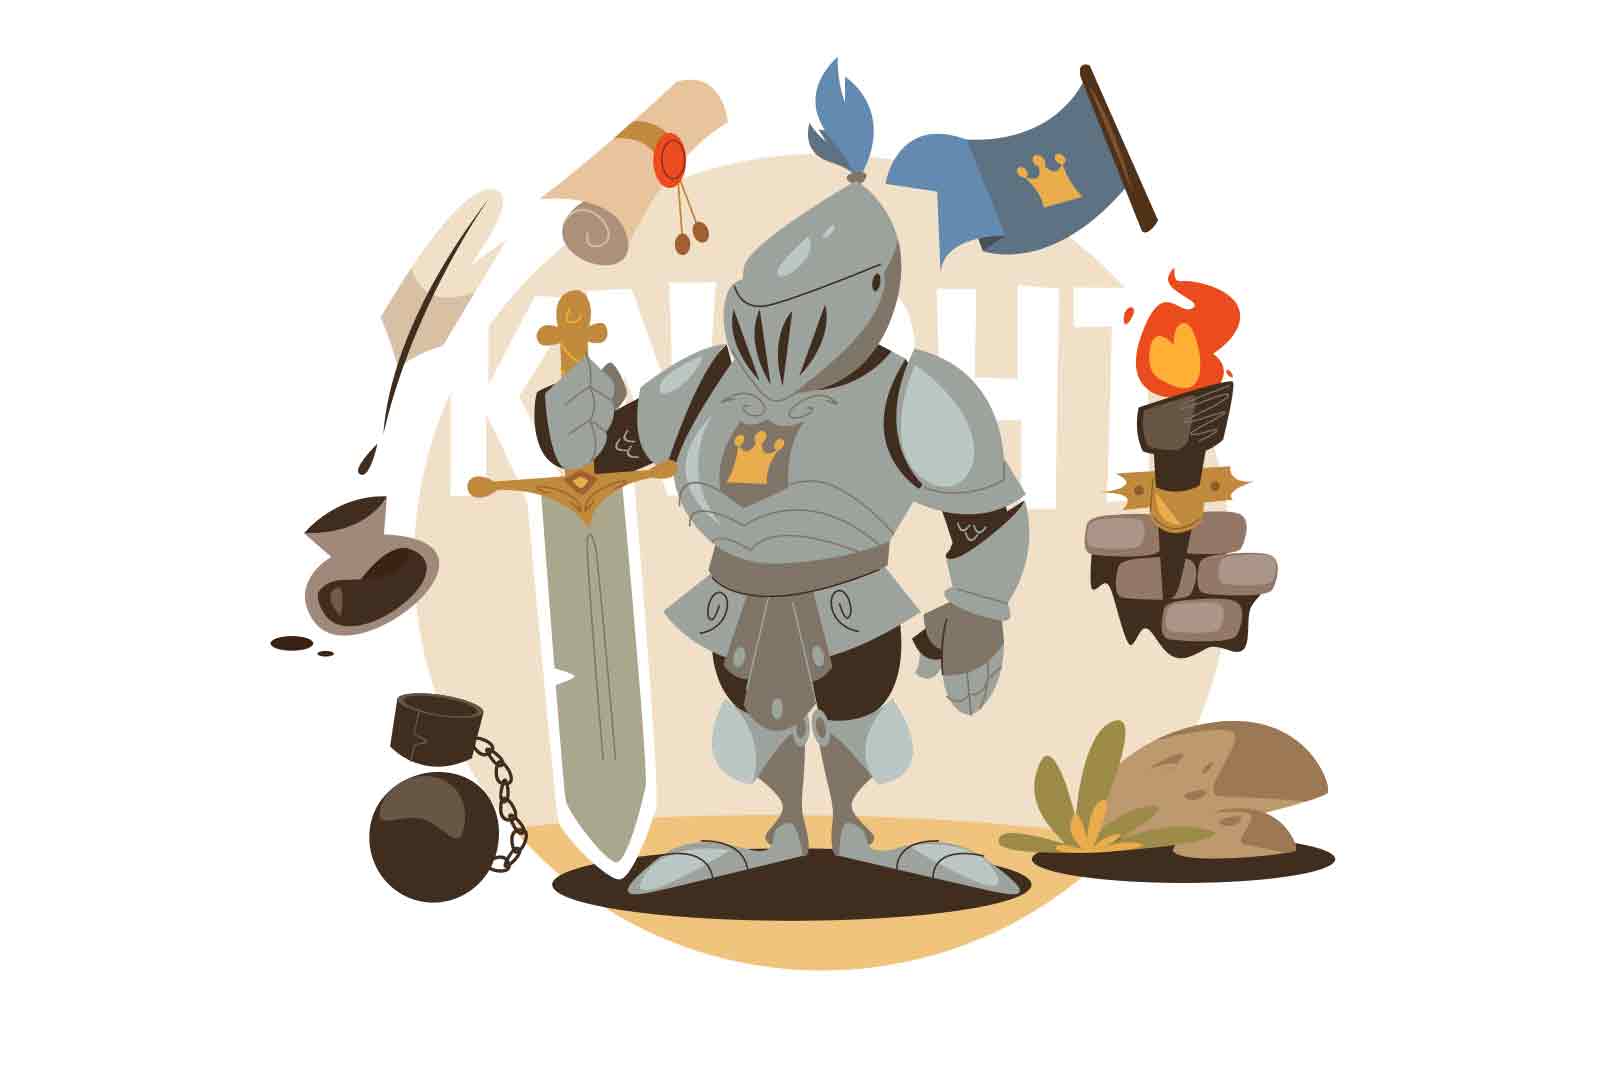 Medieval knight on battle field vector illustration. Cavalier in heavy armor and holding large sword flat style concept